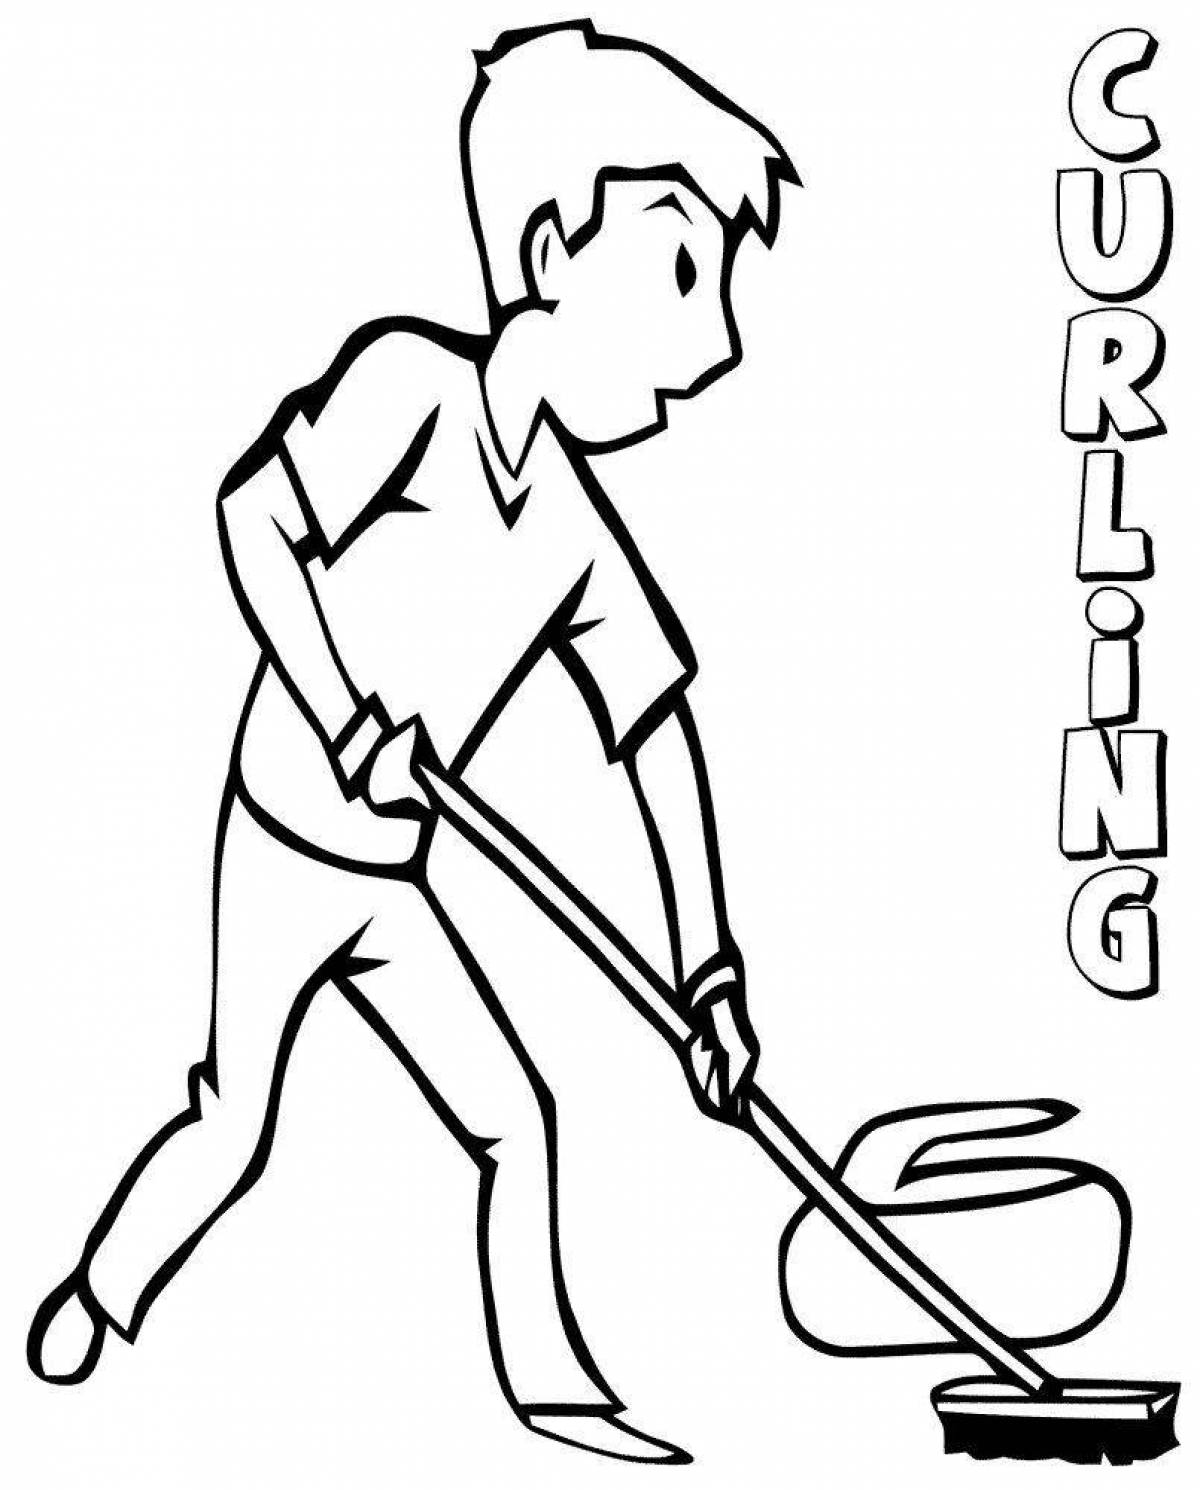 Festive Curling Coloring Page